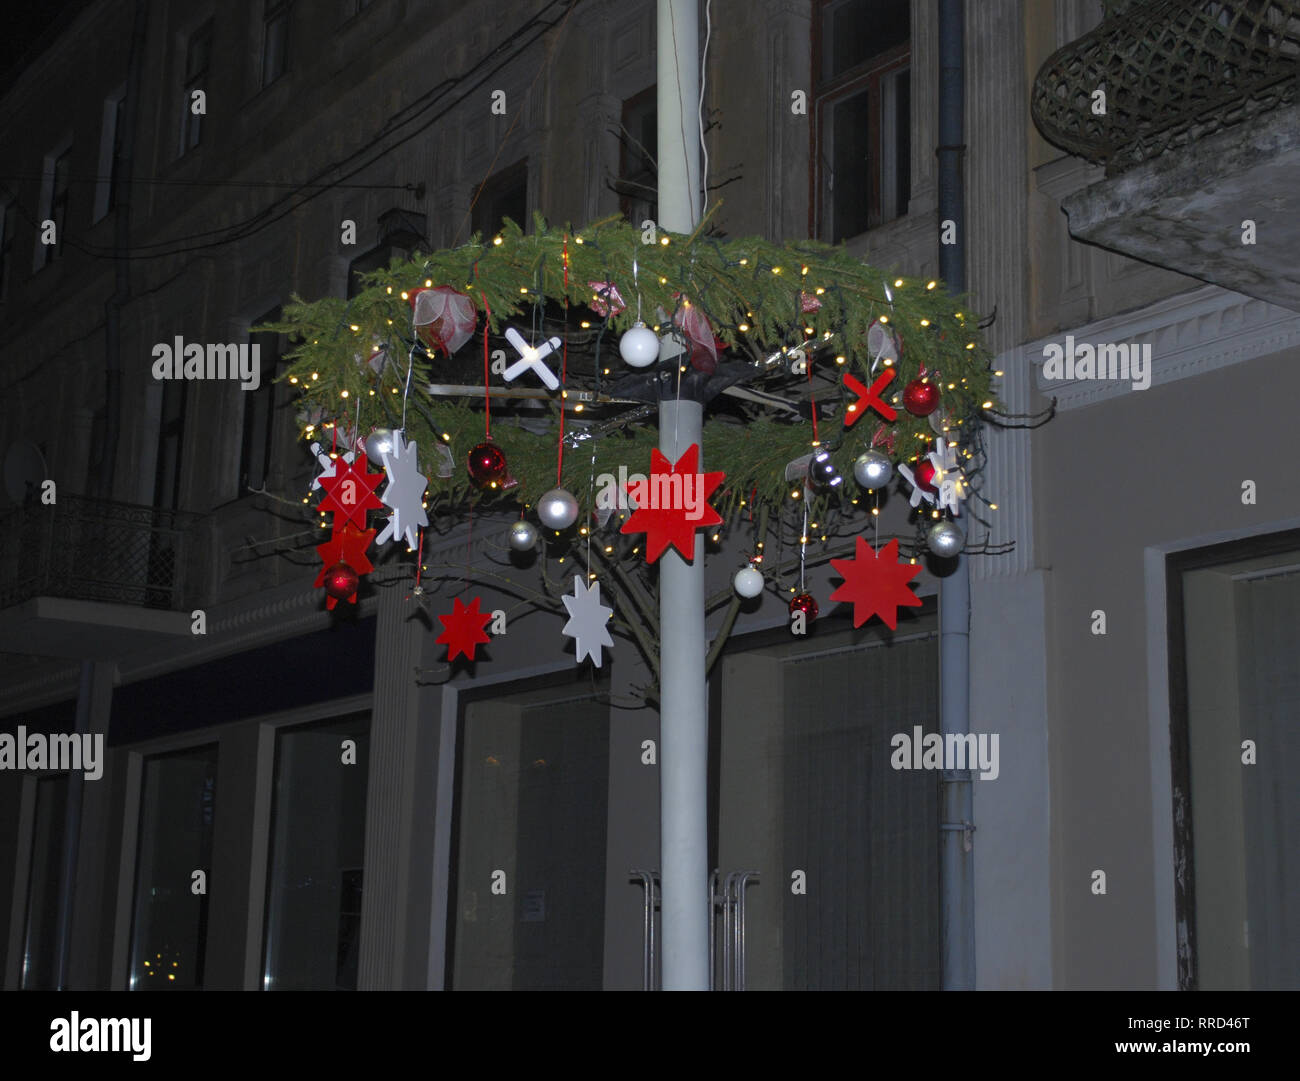 Christmas wreath. Christmas decorations on the street at night. Stock Photo